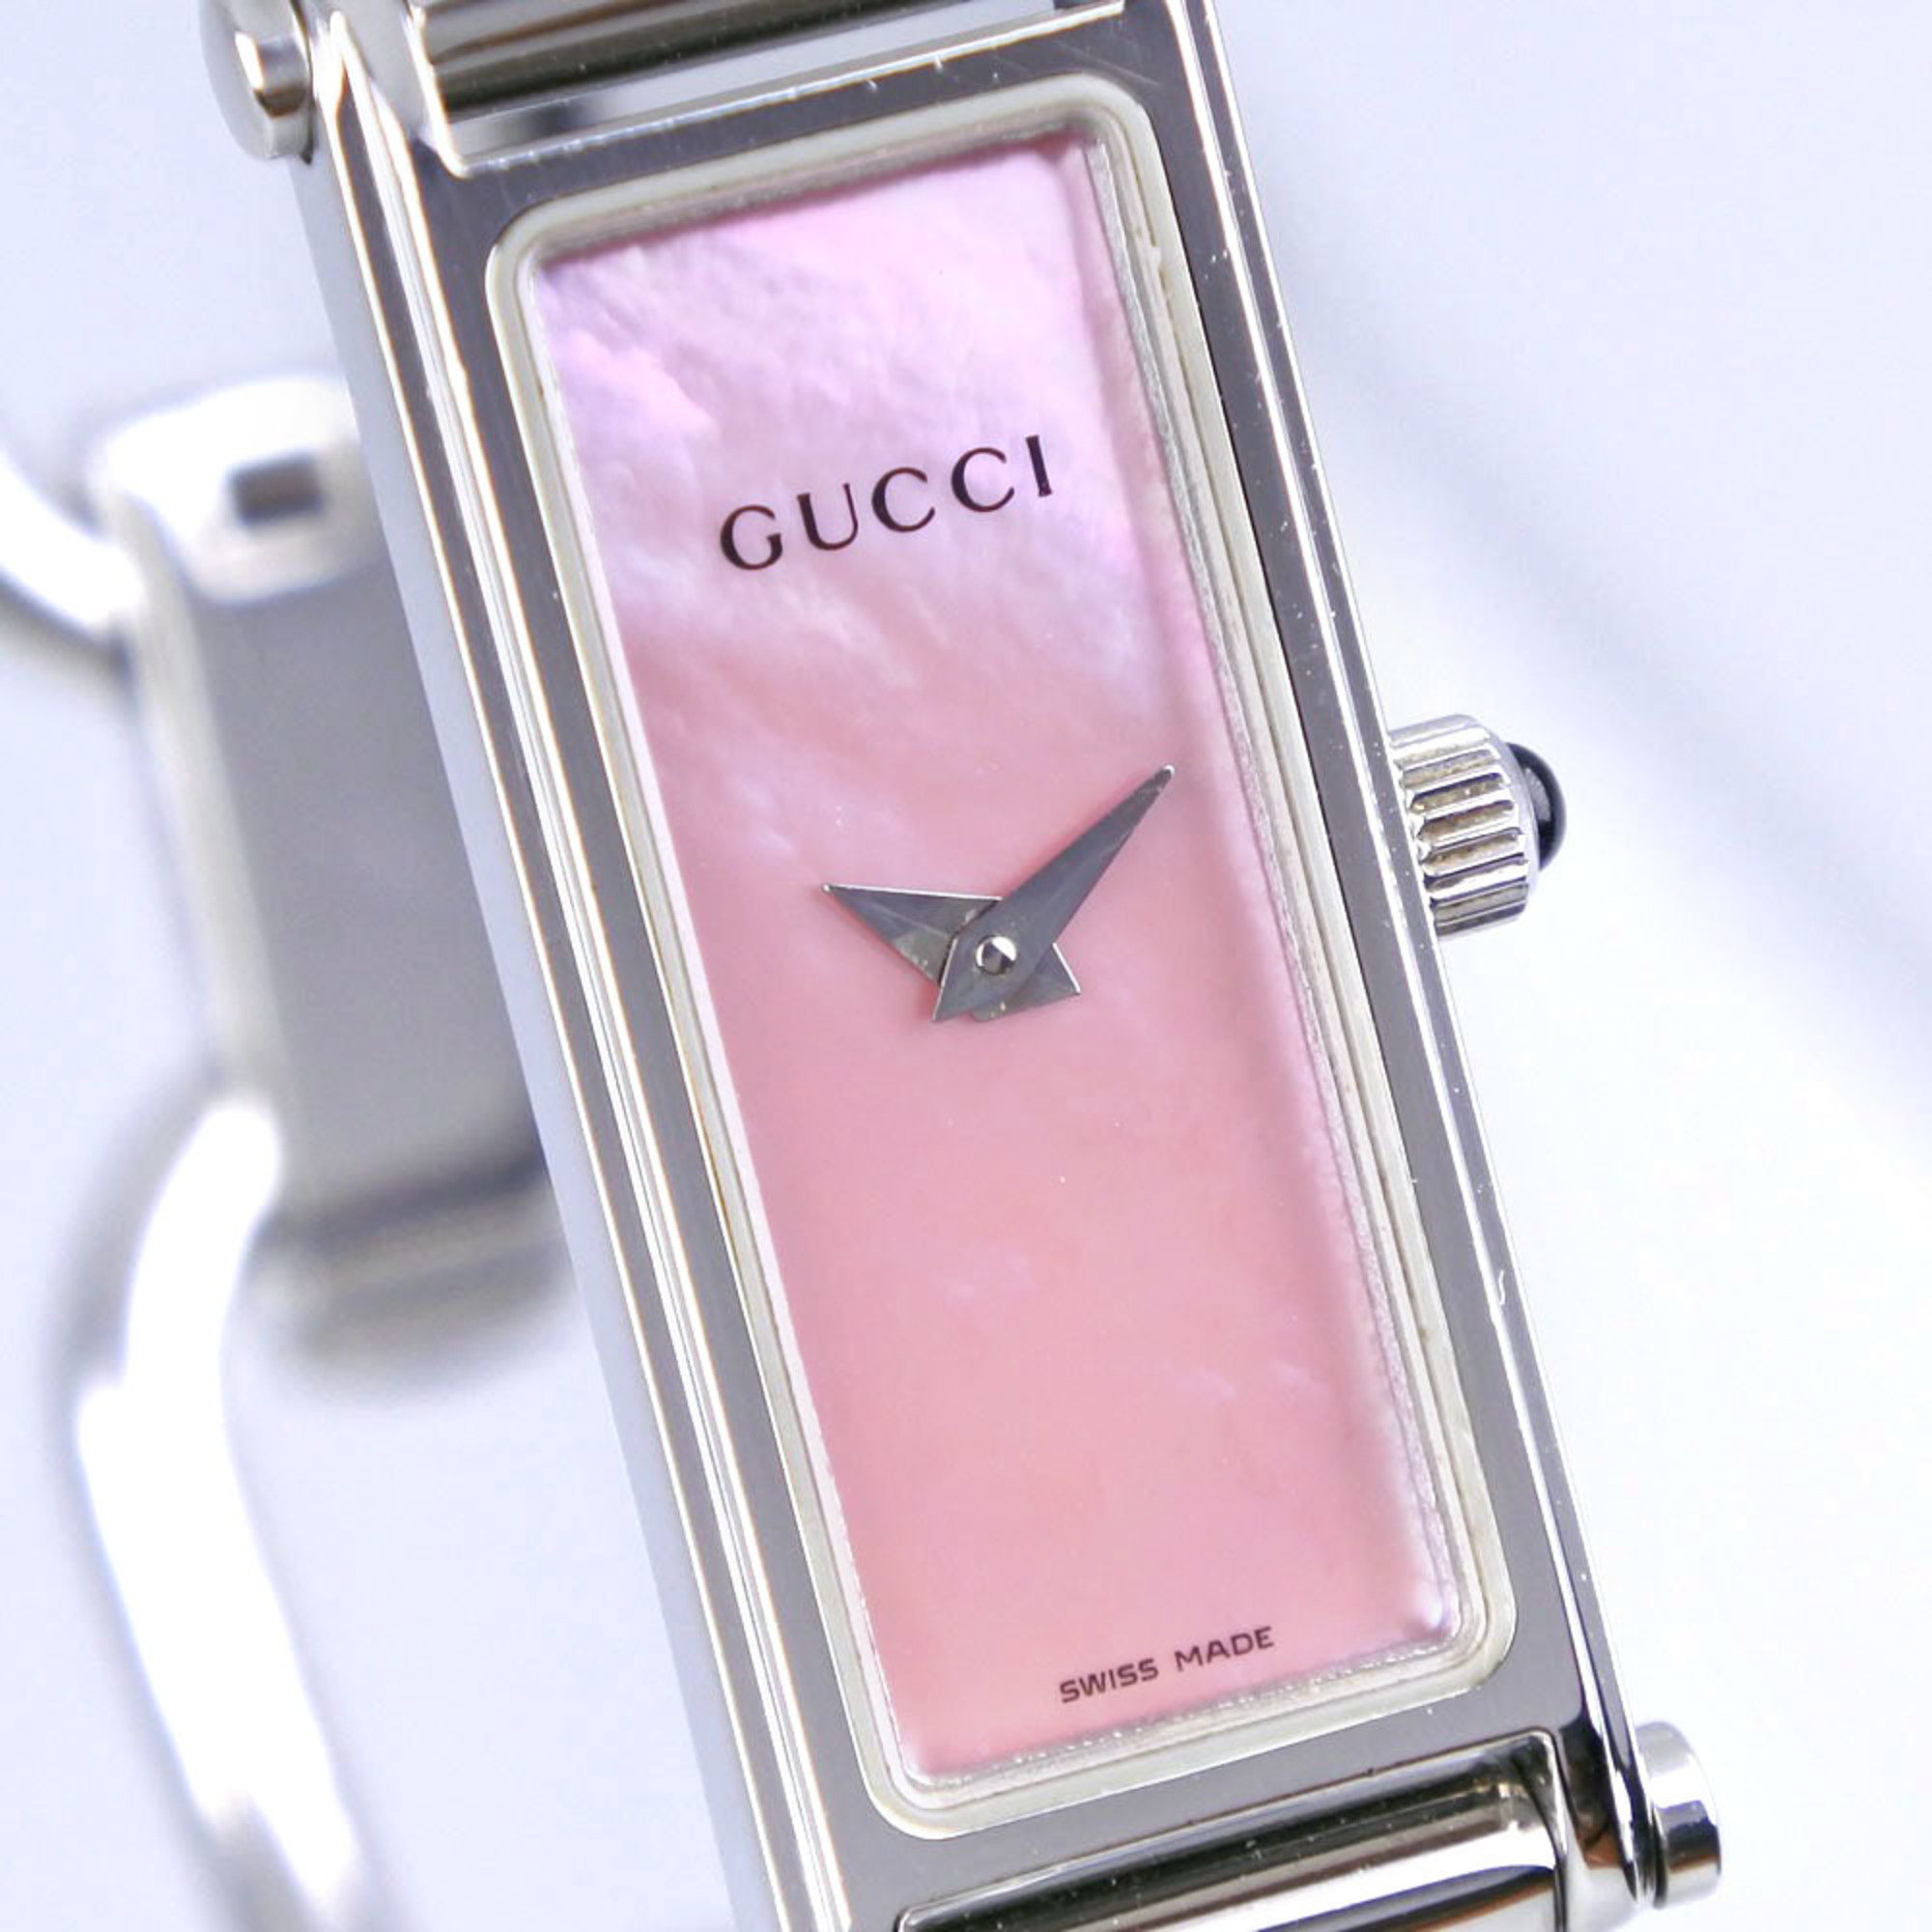 GUCCI Watch 1500L Stainless Steel Swiss Made Quartz Analog Display Pink Shell Dial Ladies